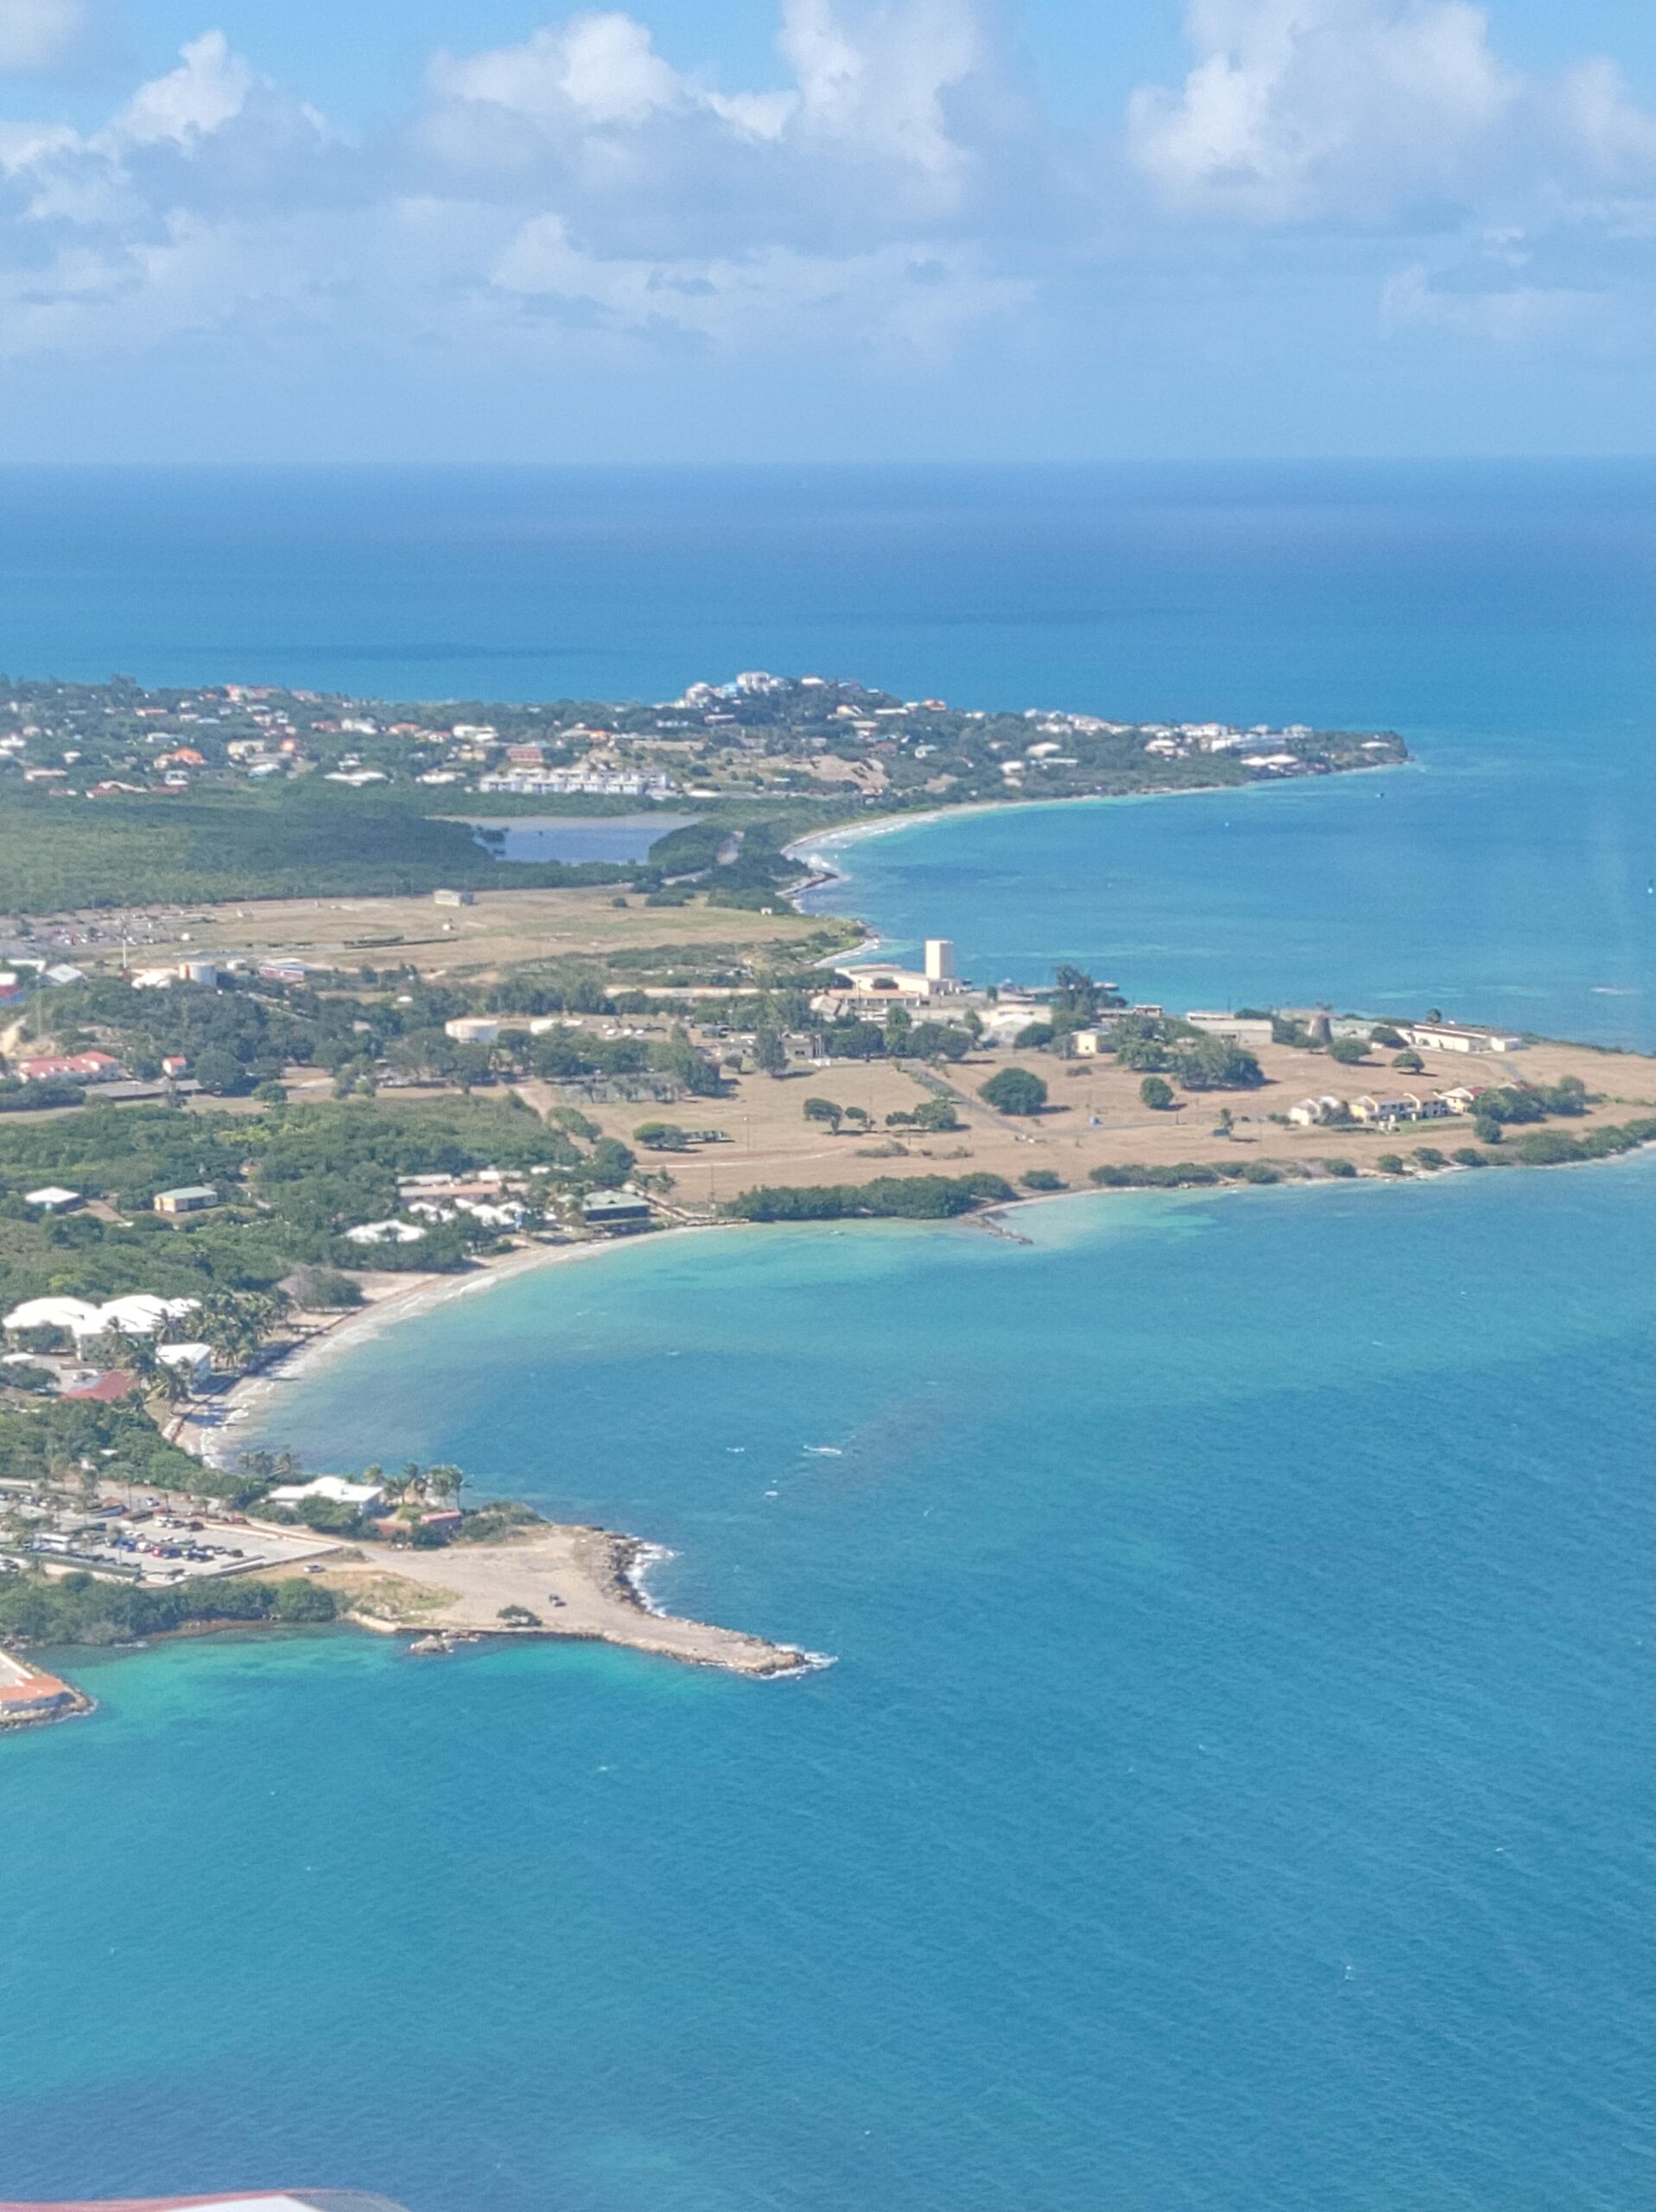 Antigua from above